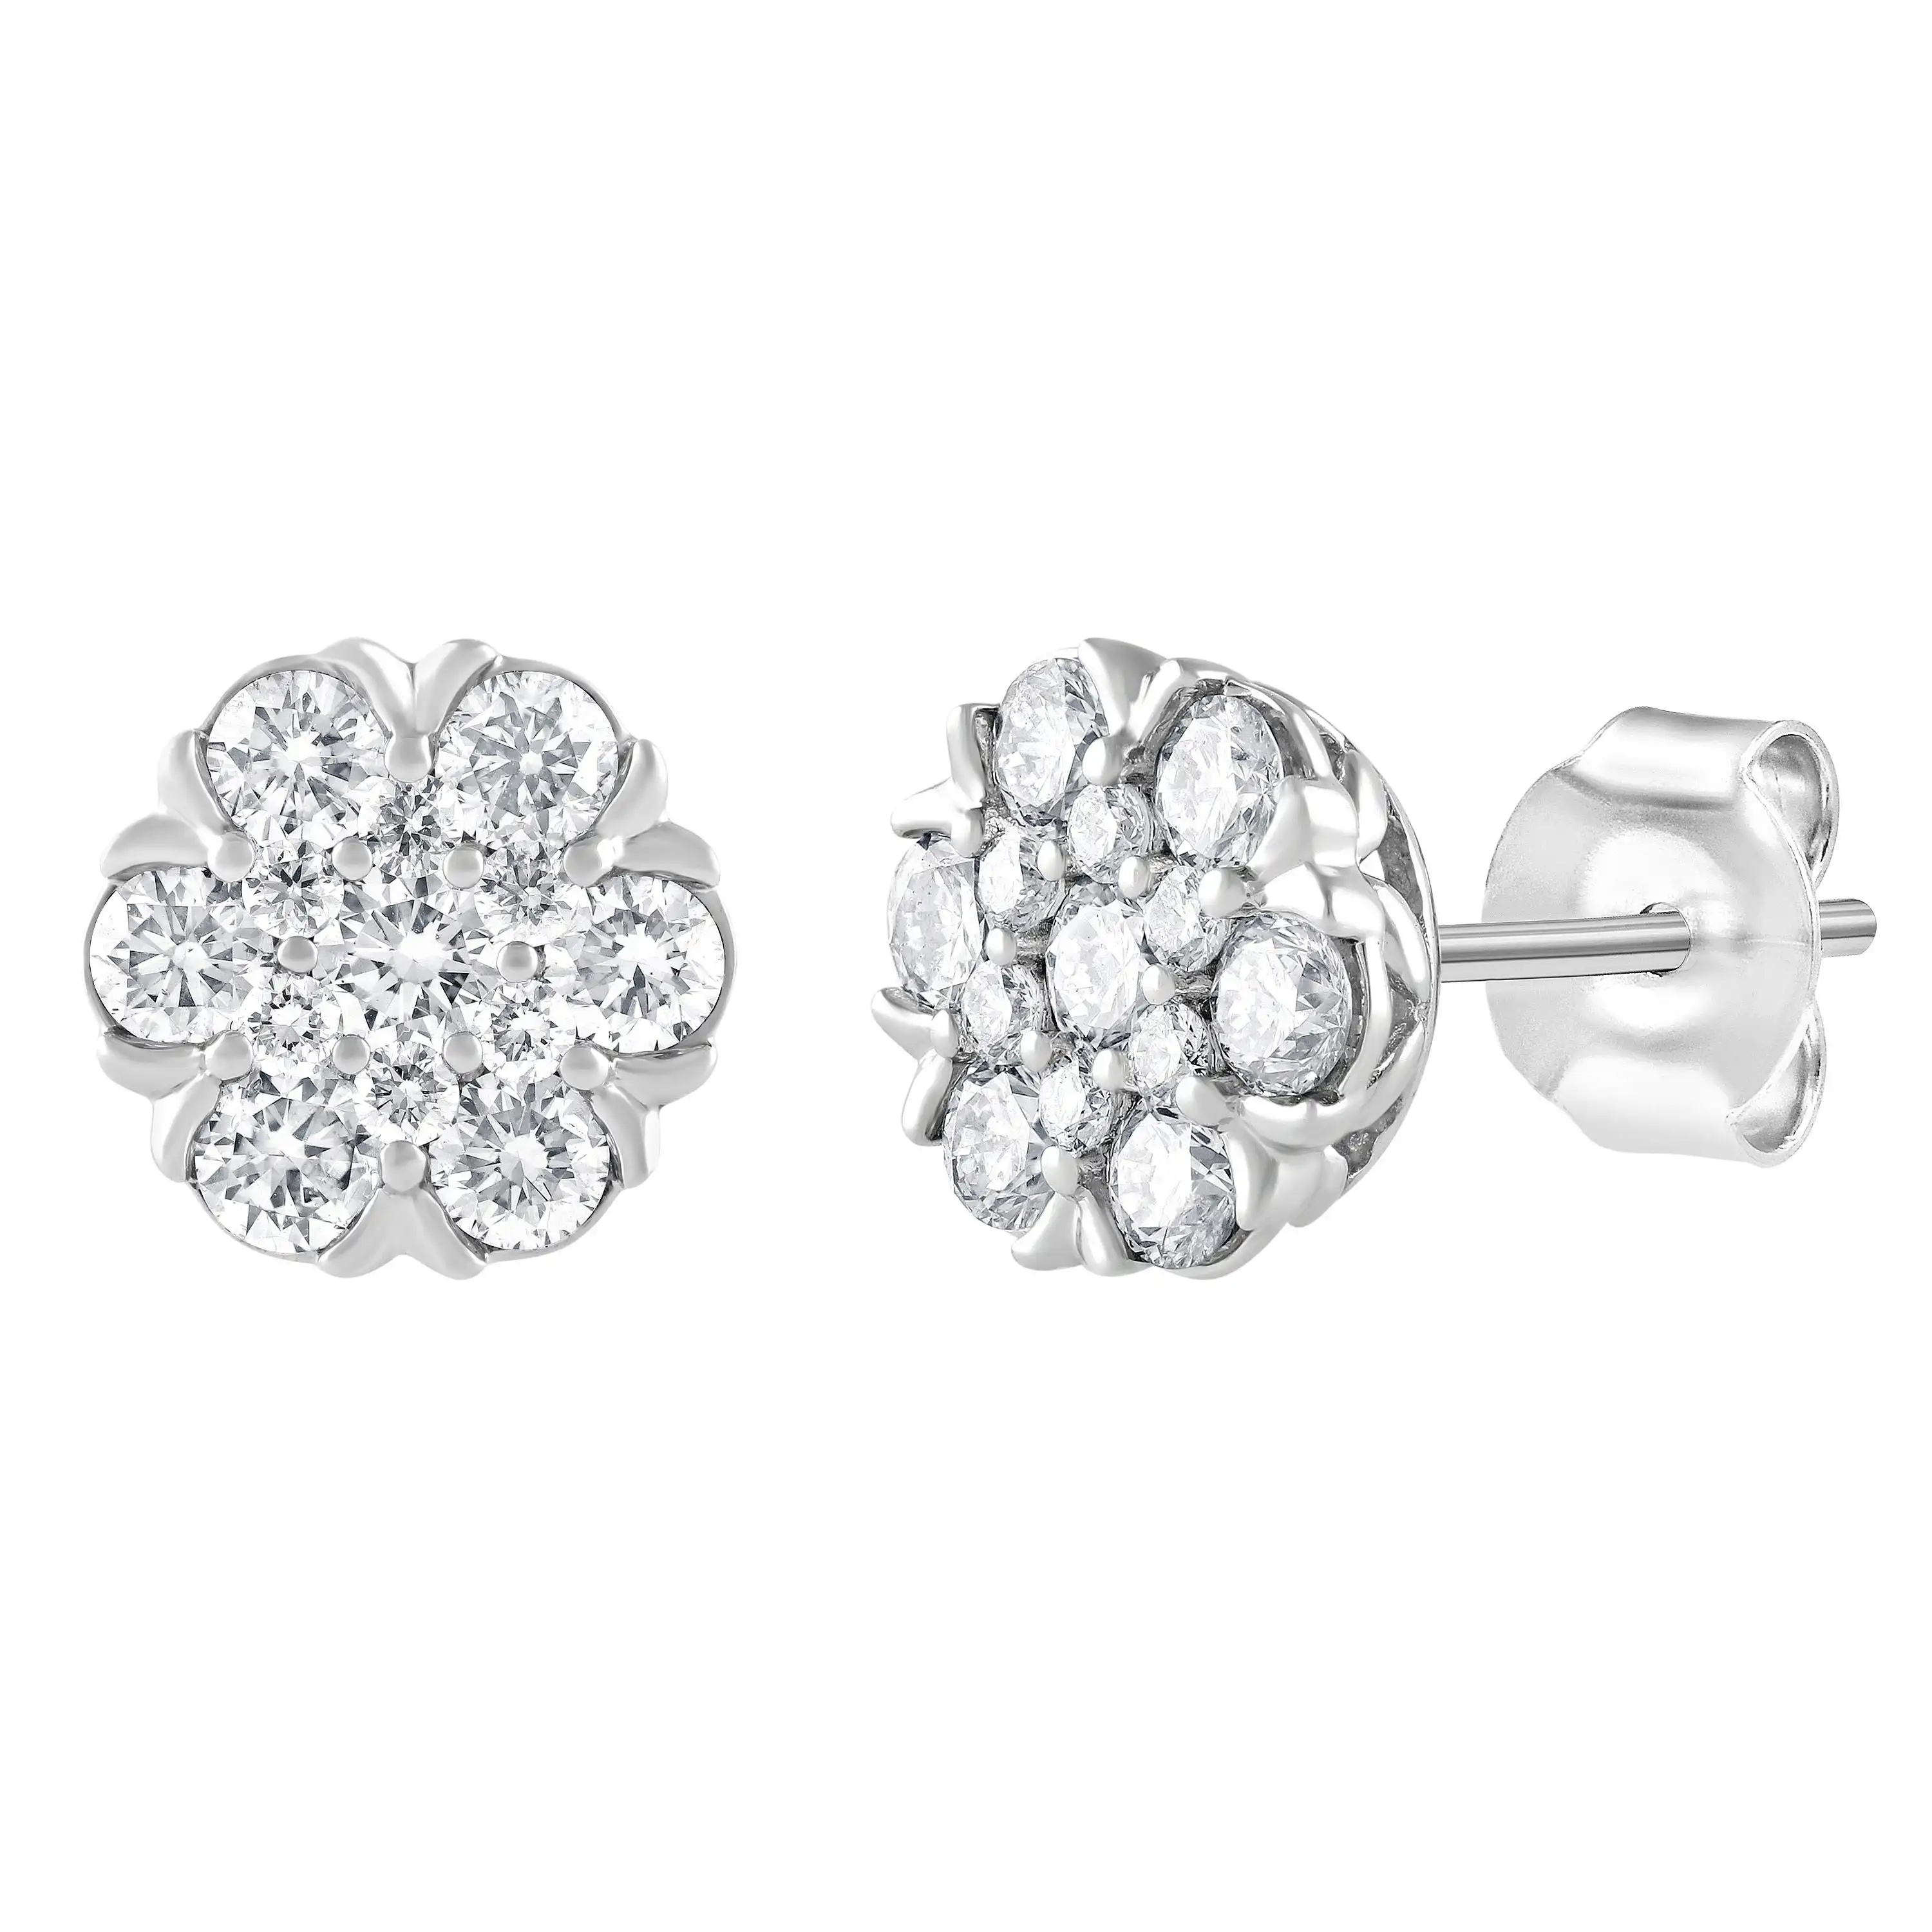 Meera Cluster Stud Earrings with 1.00ct of Laboratory Grown Diamonds in 9ct White Gold